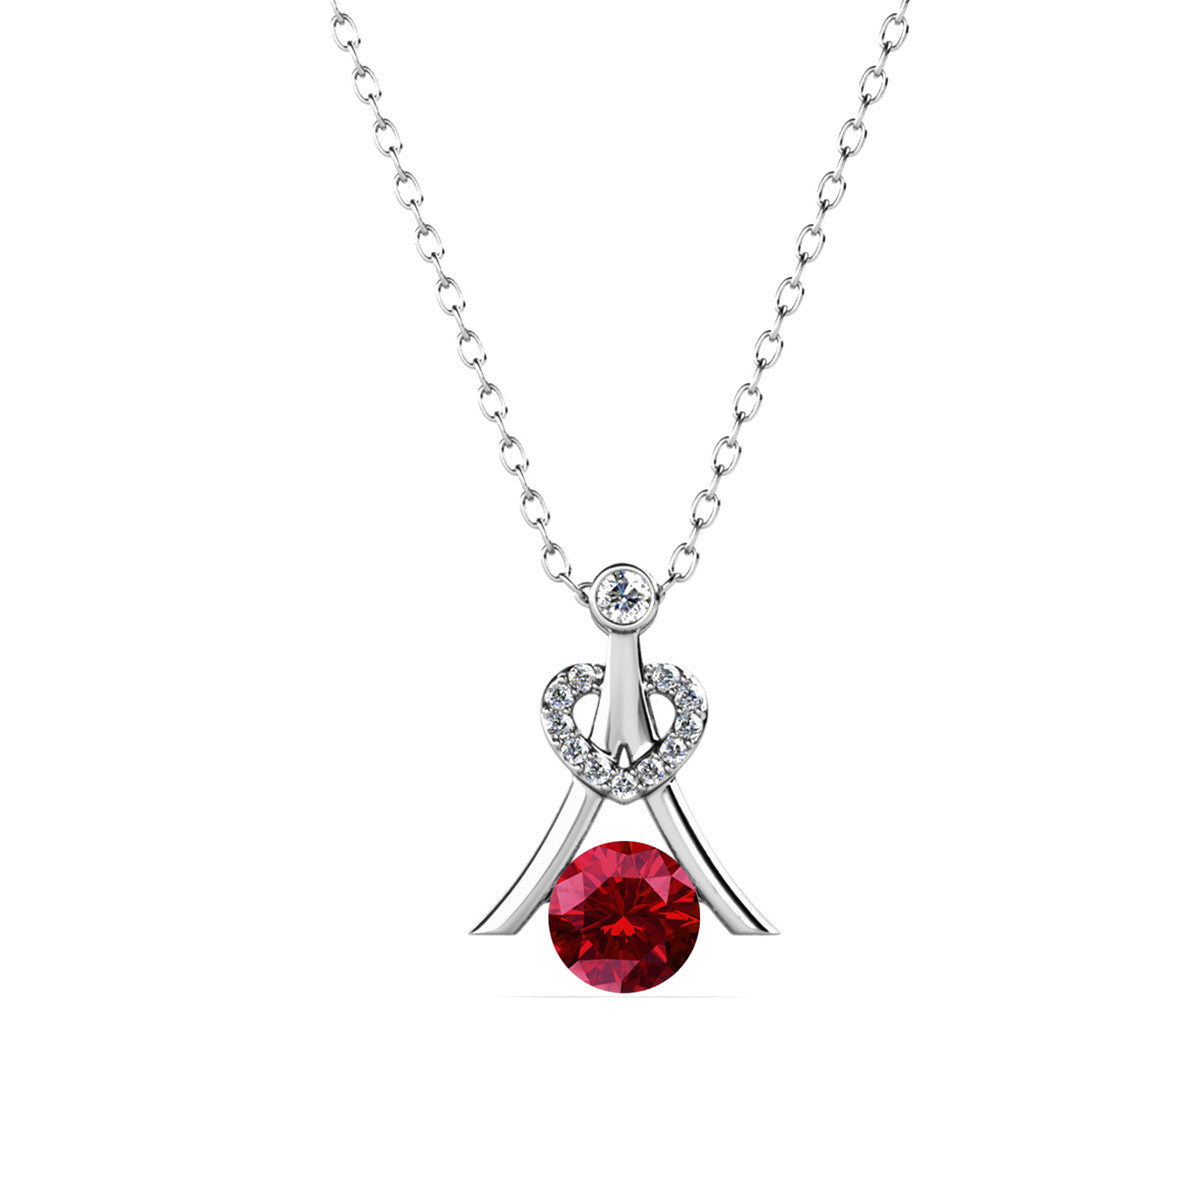 Serenity January Birthstone Garnet Necklace, 18k White Gold Plated Silver Necklacewith Round Cut Crystals